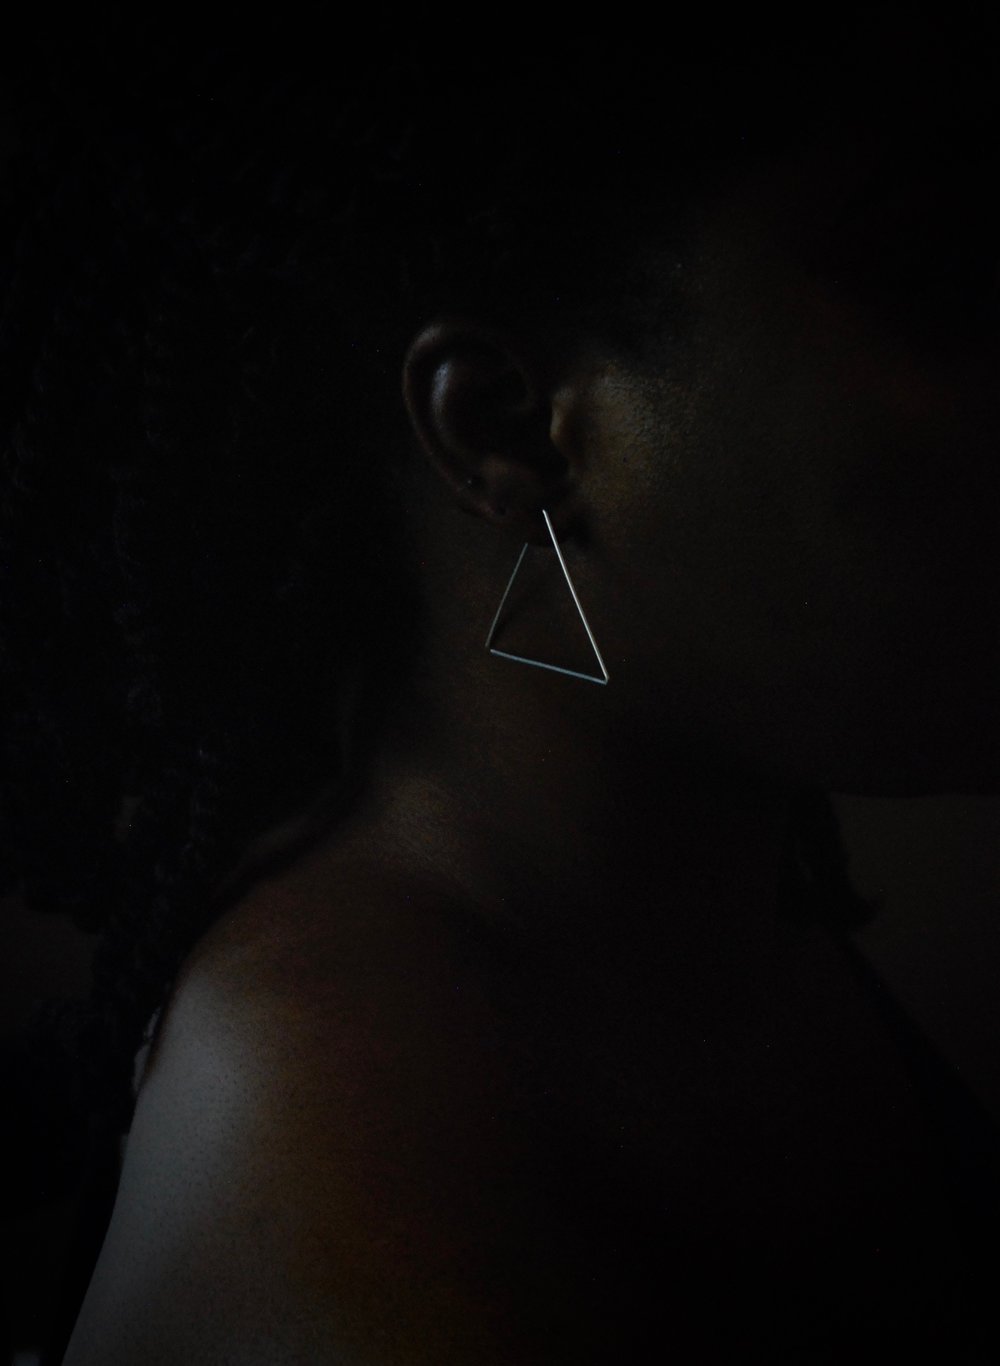 Sterling Silver Triangle Earring